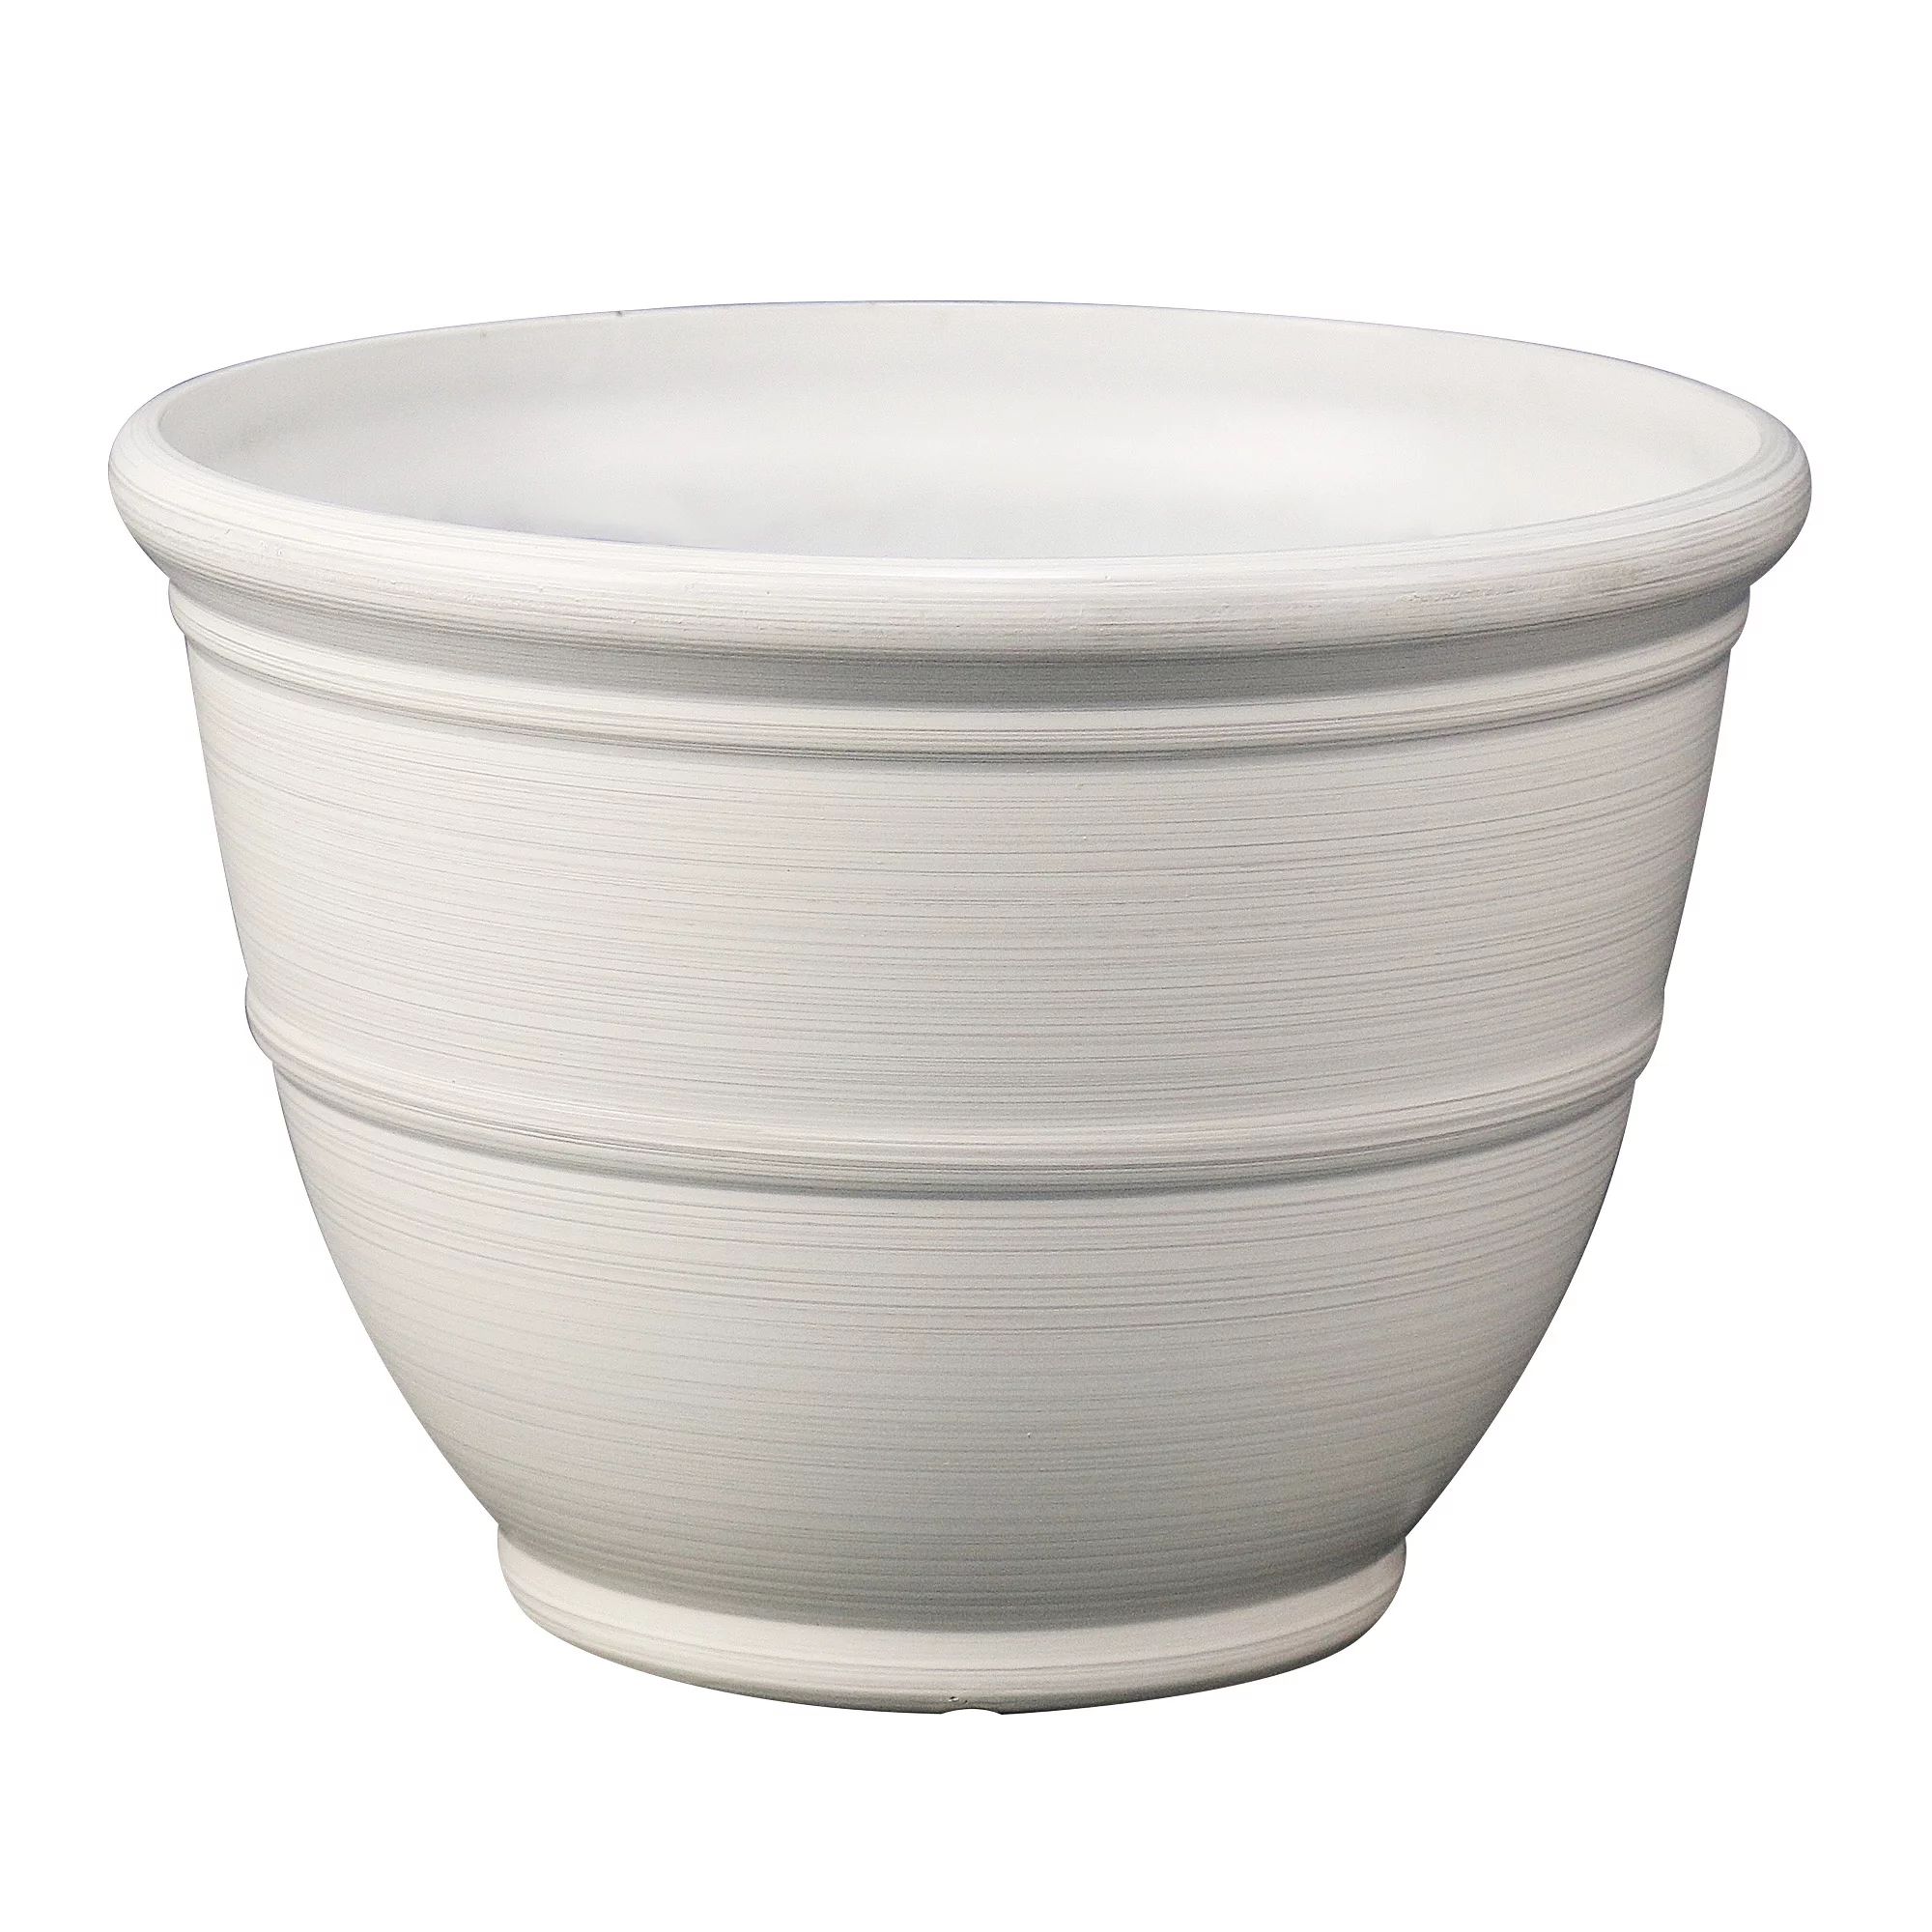 Mainstays Ferenza Recycled Resin Planter, White, 14in x 14in x 10in | Walmart (US)